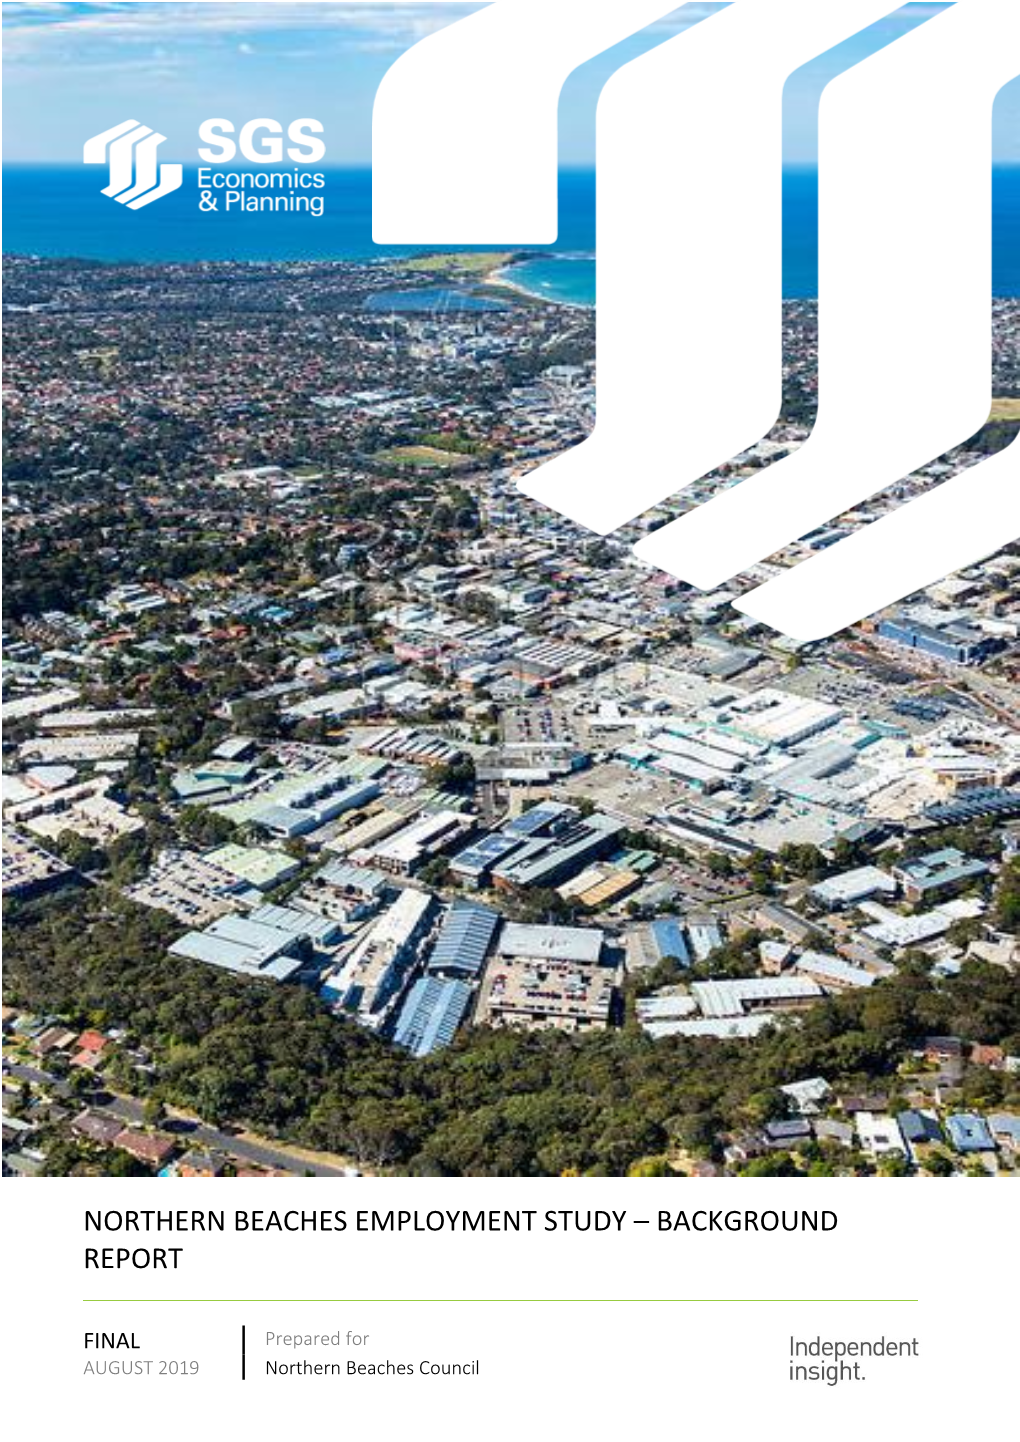 Northern Beaches Employment Study – Background Report